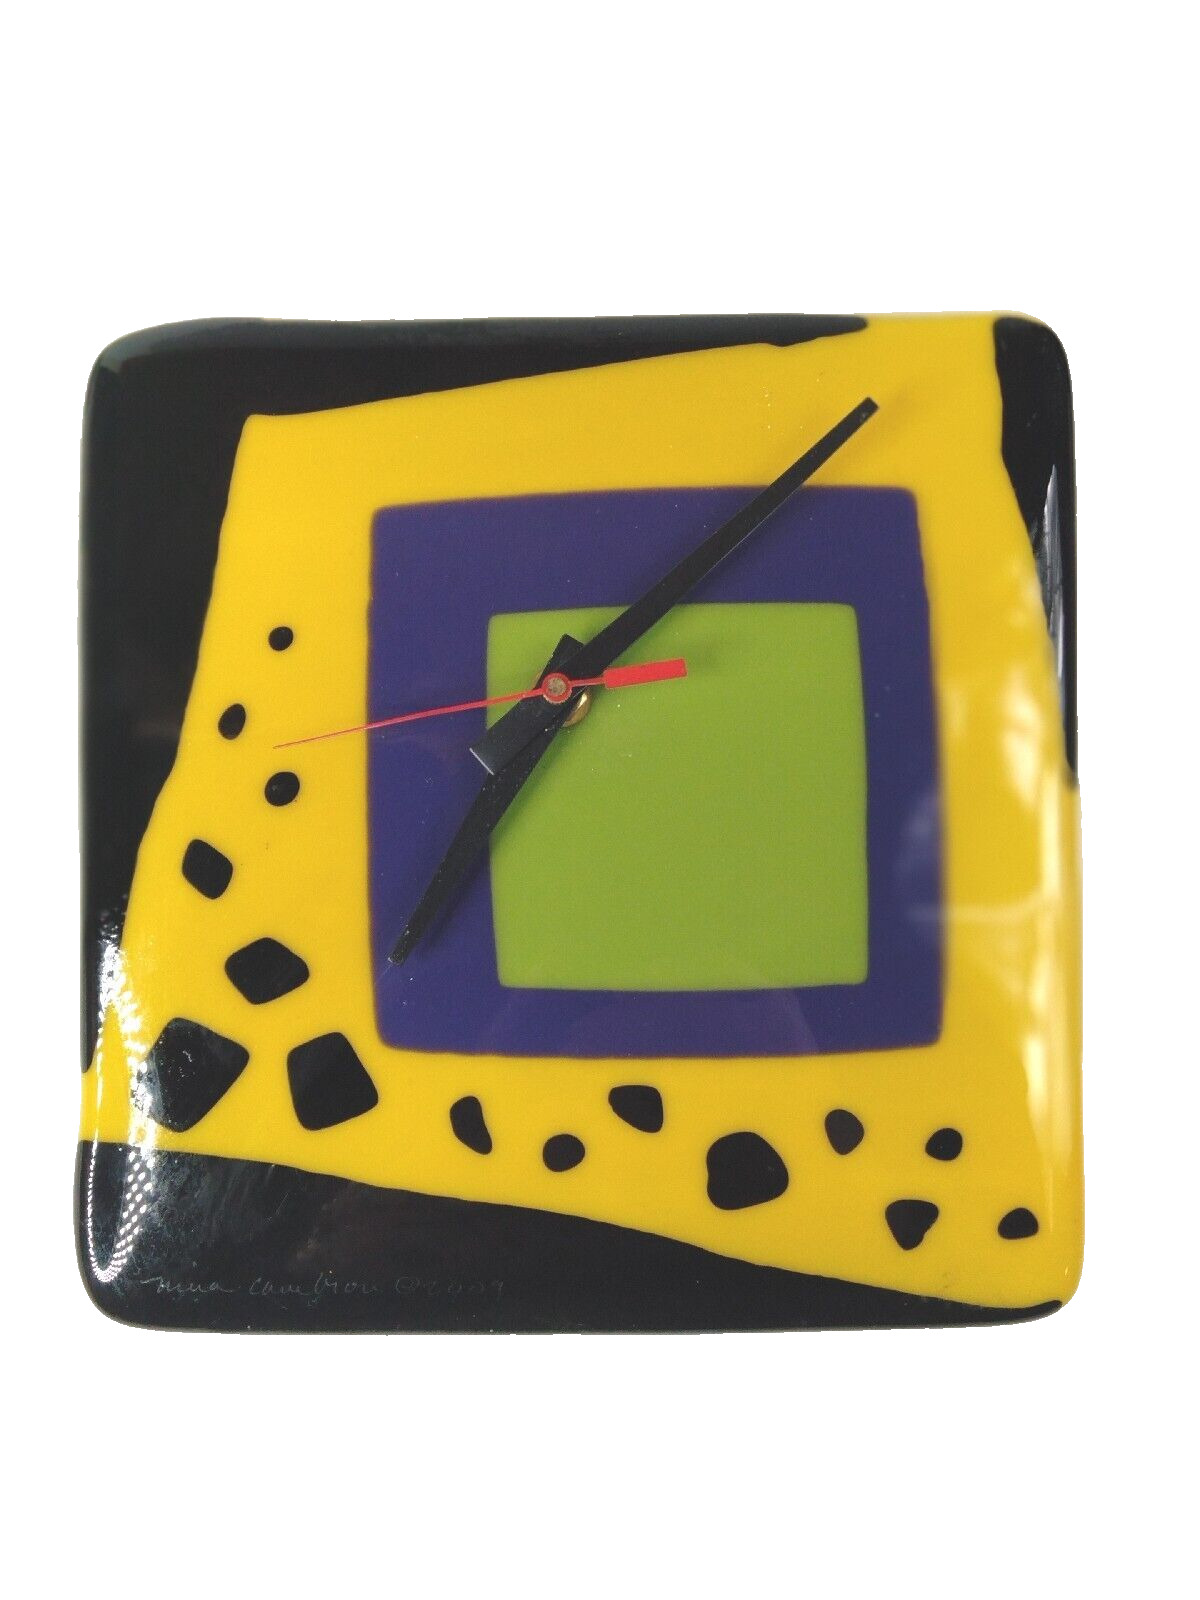 Artist Signed Art Glass Clock Yellow Black Funky Signed Dated Tested Works